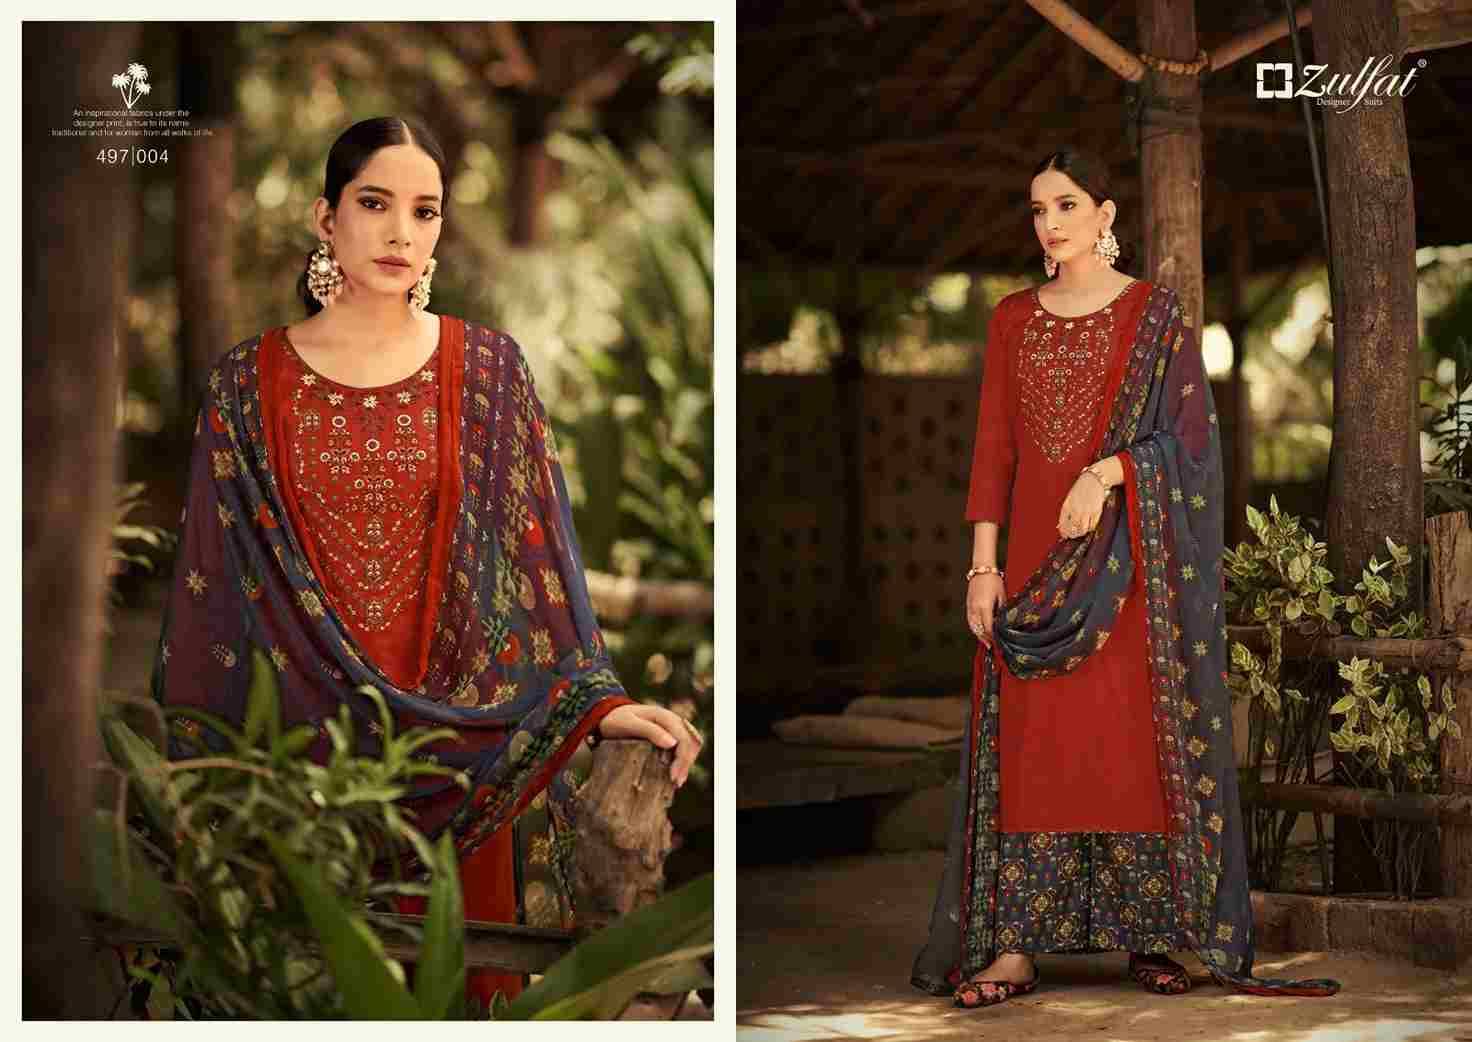 Damini 497 Series By Zulfat 497-001 To 497-010 Series Beautiful Stylish Festive Suits Fancy Colorful Casual Wear & Ethnic Wear & Ready To Wear Pure Jam Cotton Digital Print Dresses At Wholesale Price